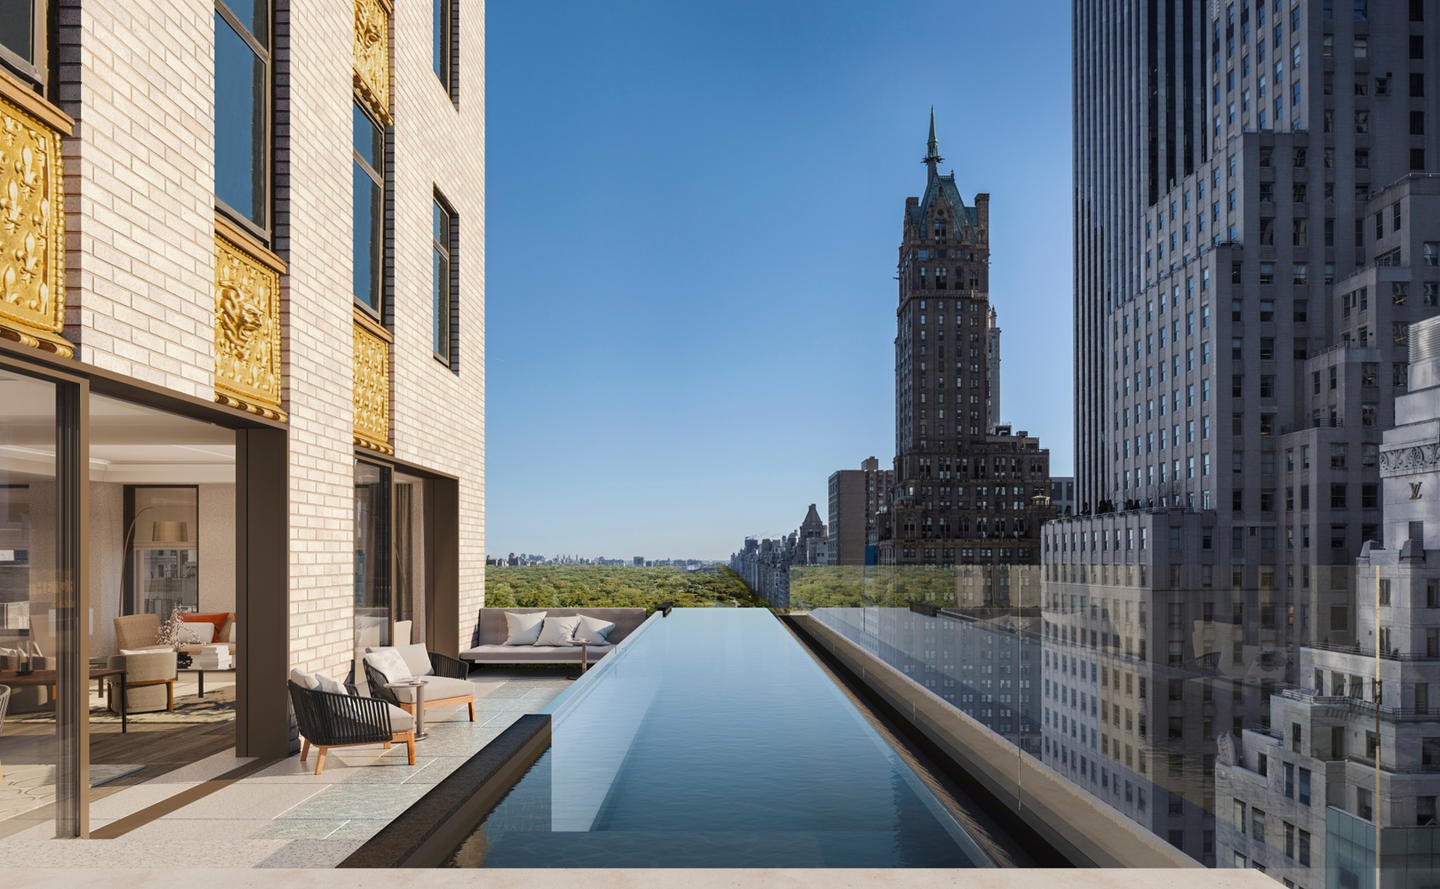 View of New York City from room Aman Hotel New York which is flanked by a pool.